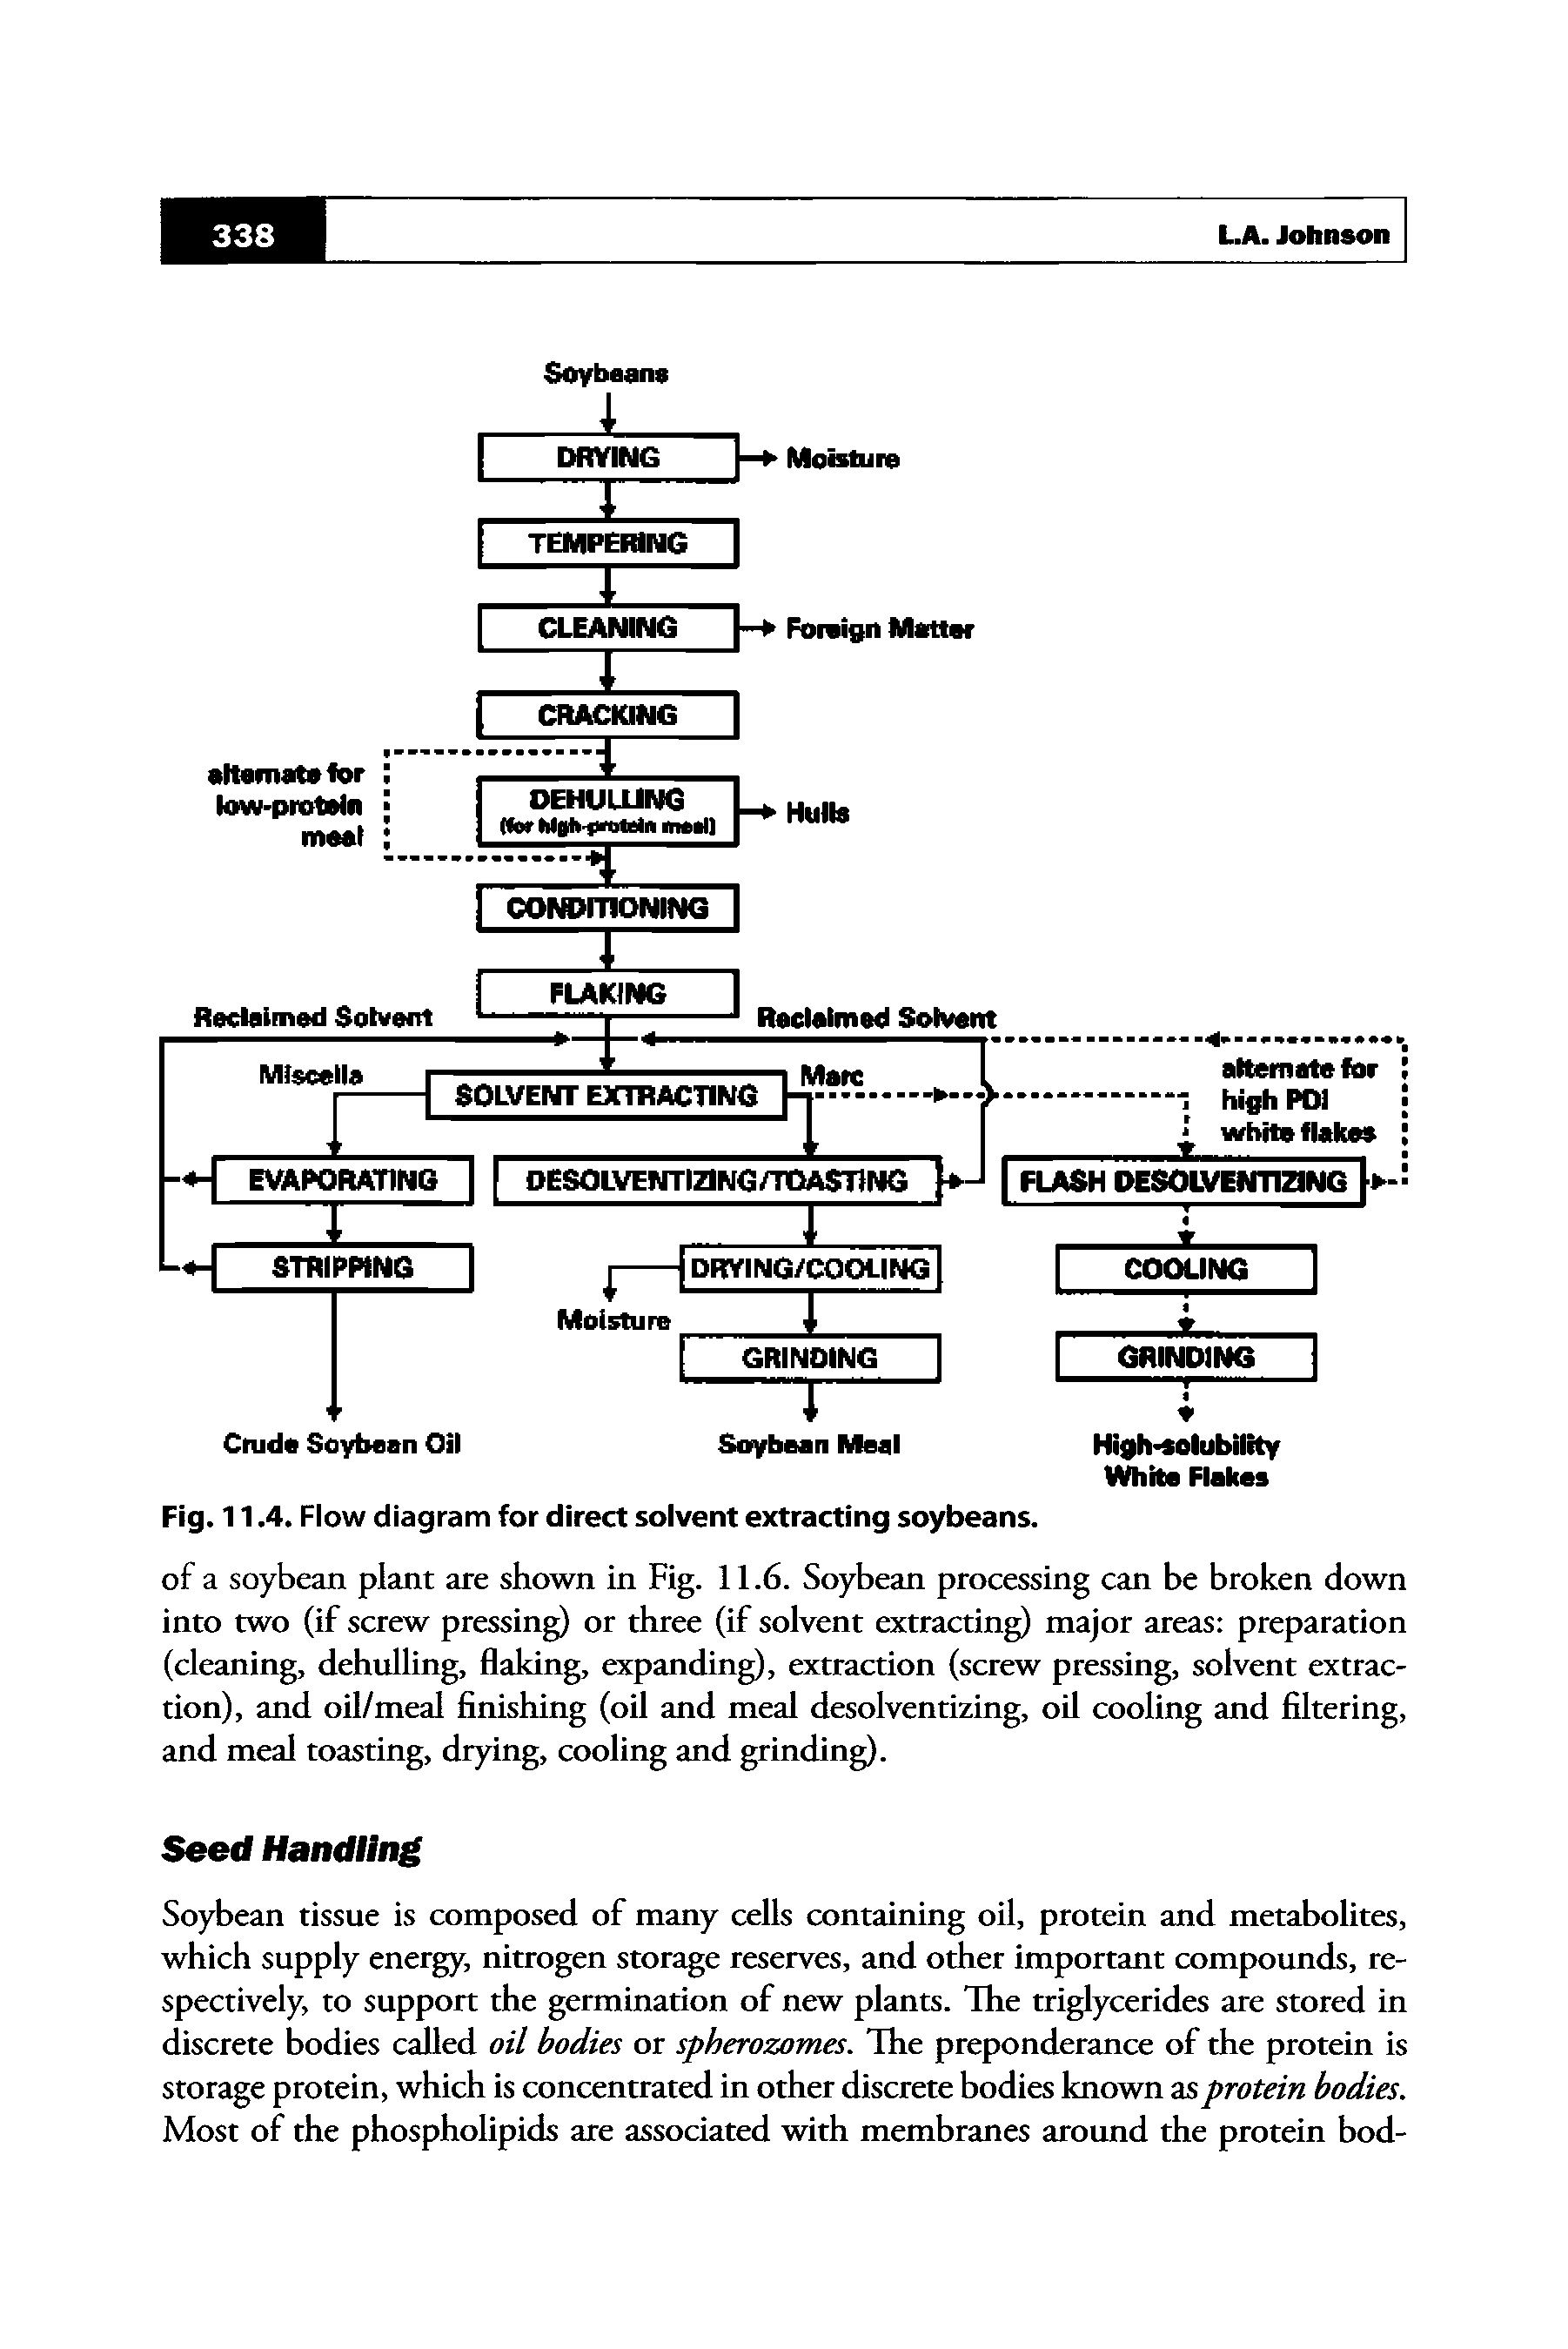 Fig. 11.4. Flow diagram for direct soivent extracting soybeans.